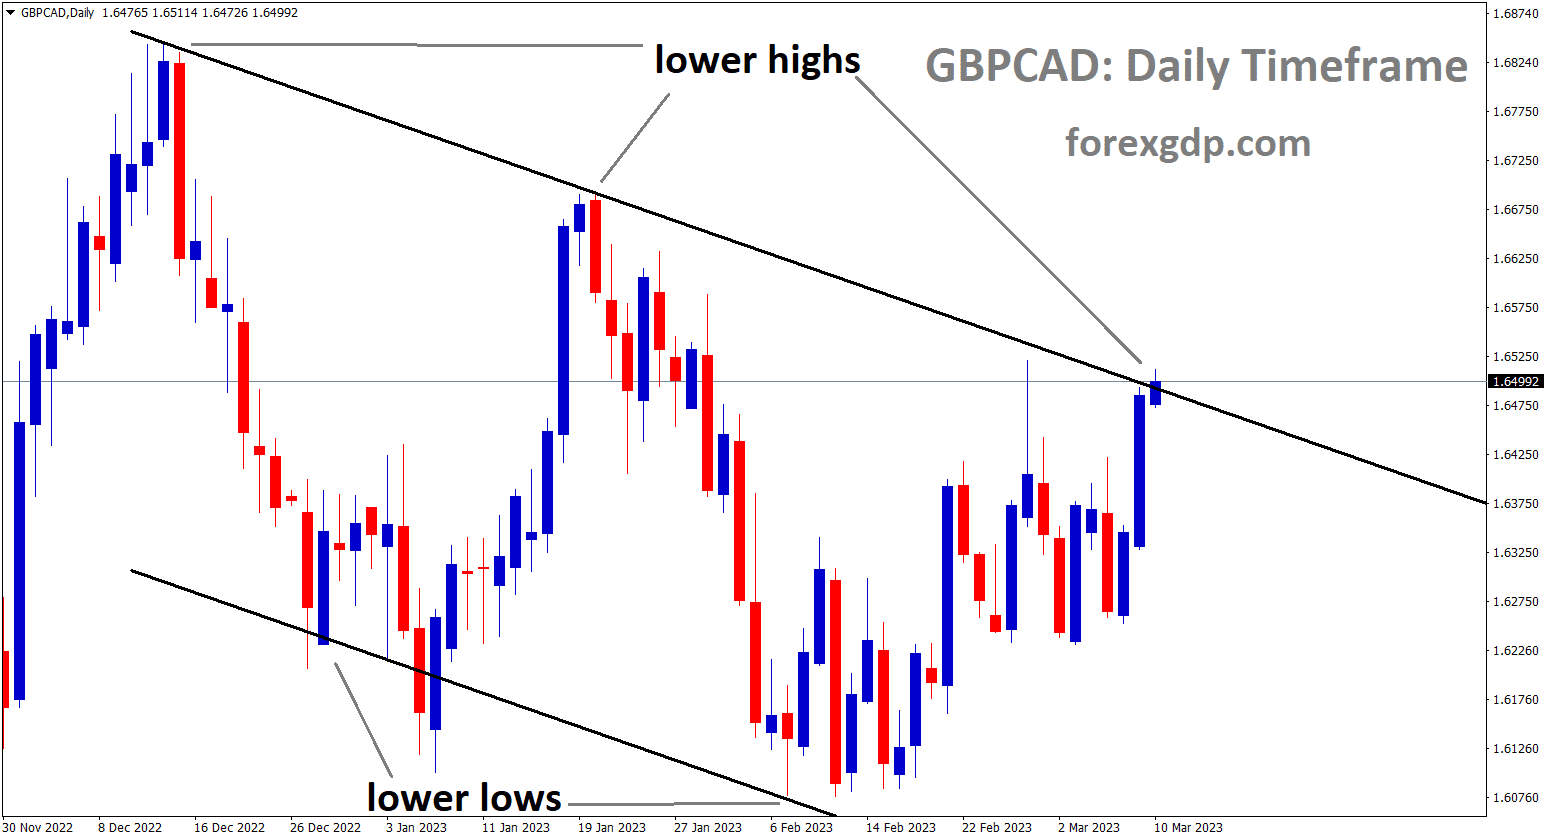 GBPCAD ending channel and the market has reached lower high area of the channel.